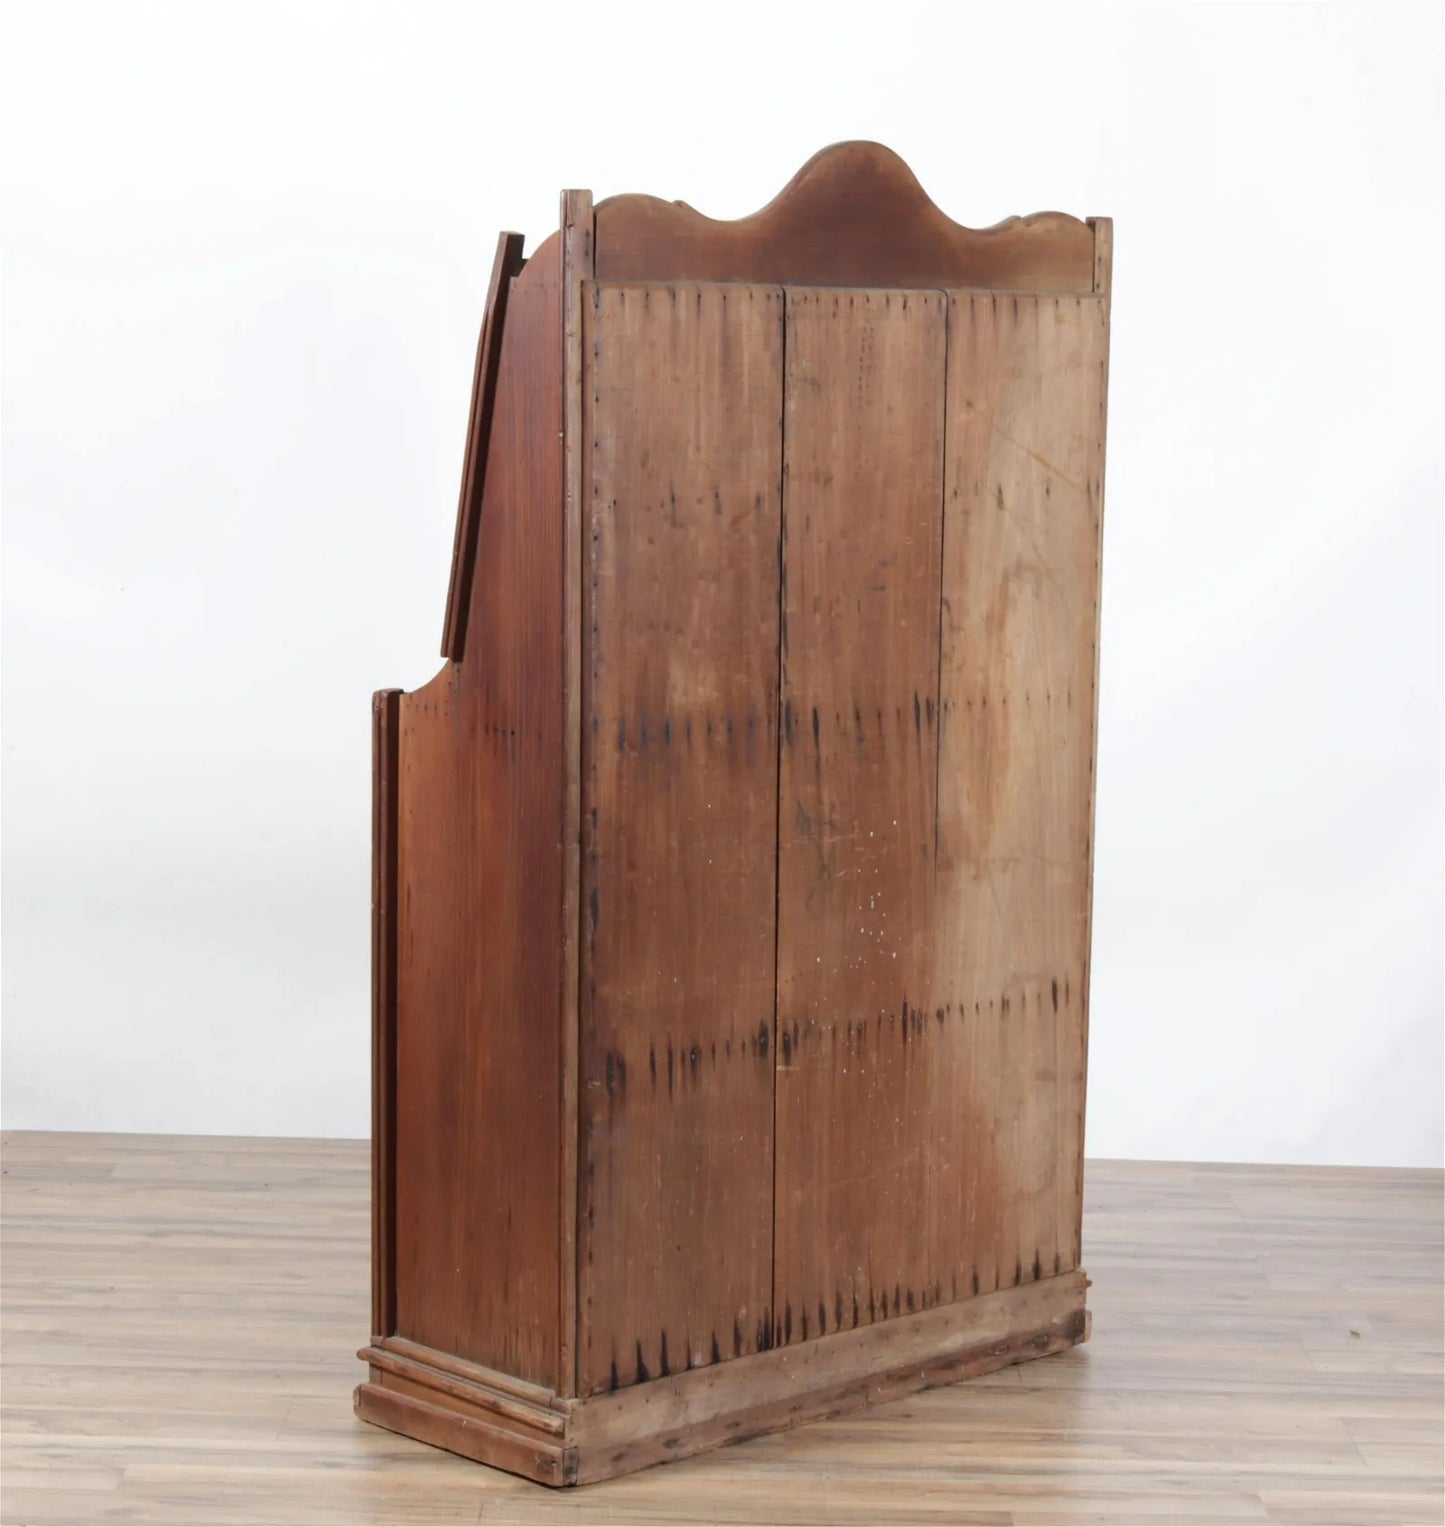 Country Pine Work Chest, 19th C. American